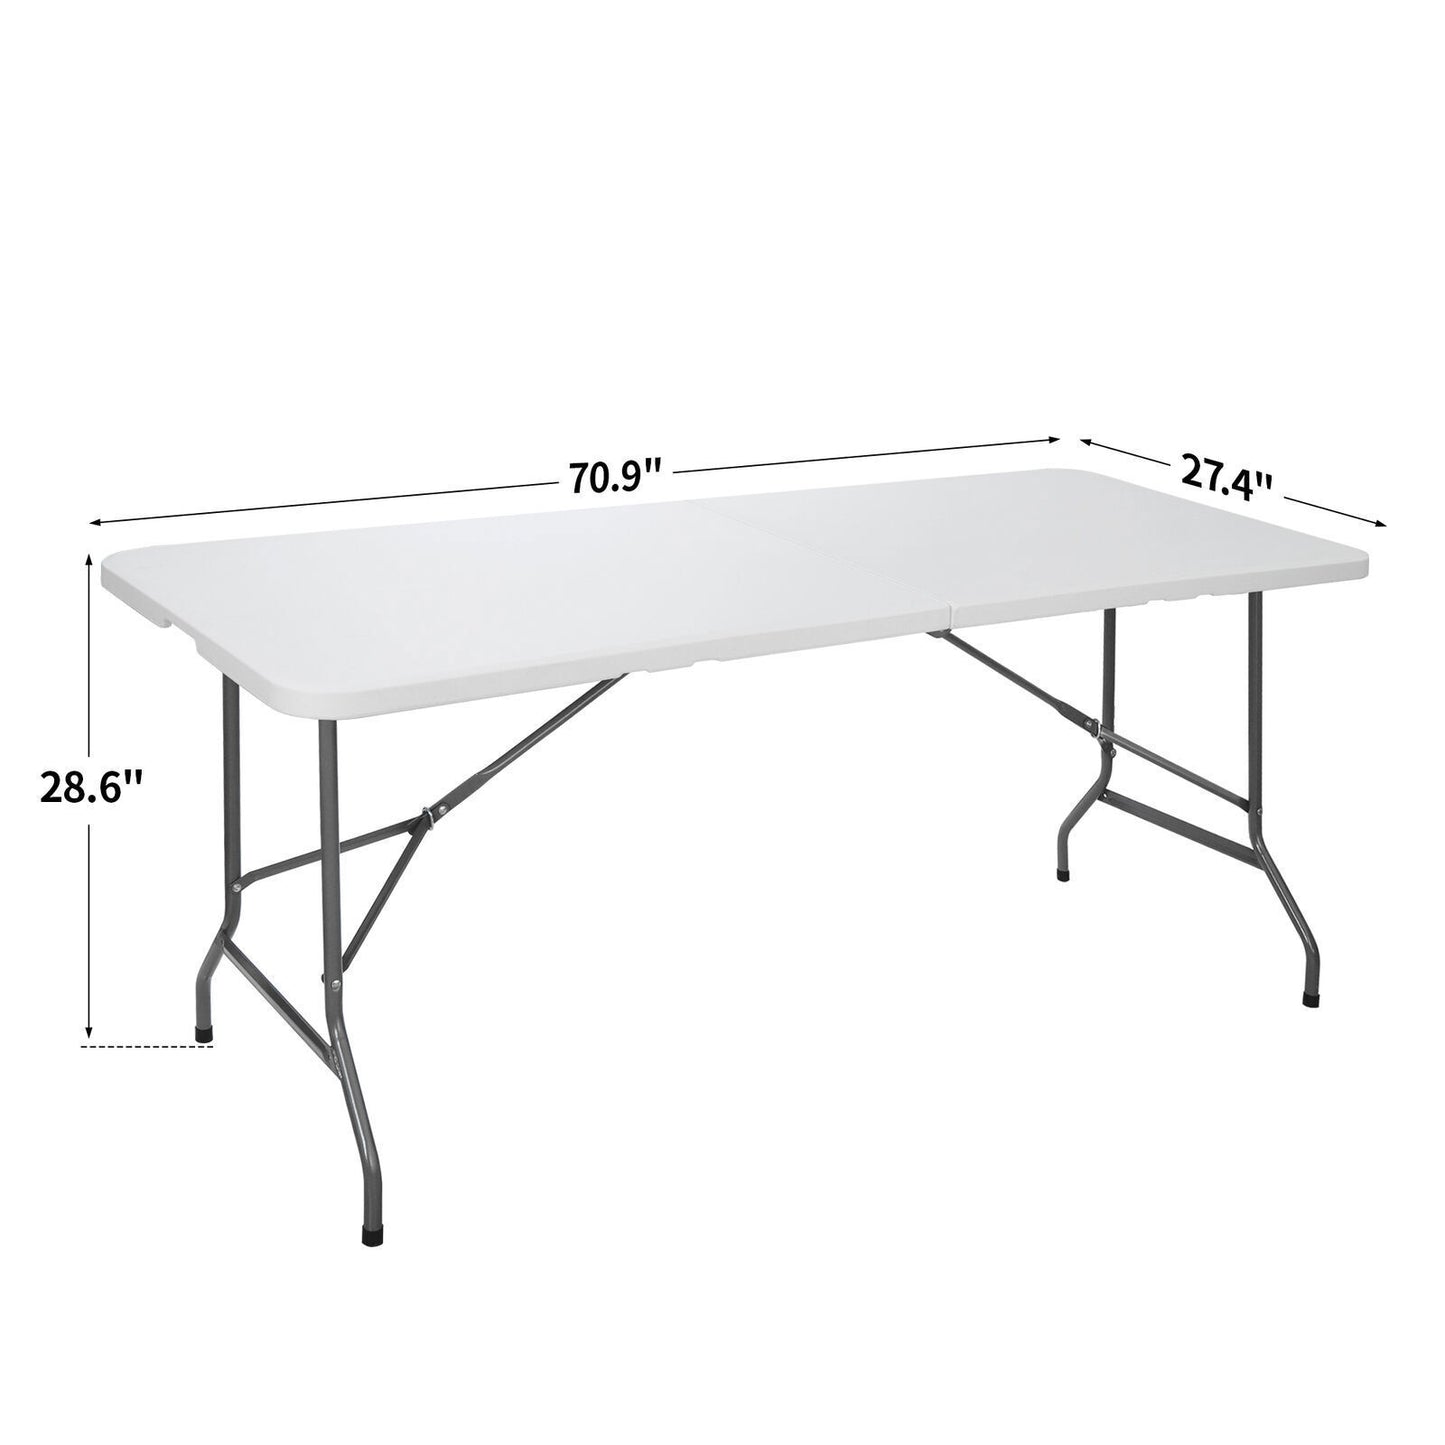 2PCS 6ft Folding Table Portable Indoor Outdoor Picnic Party Camping Tables